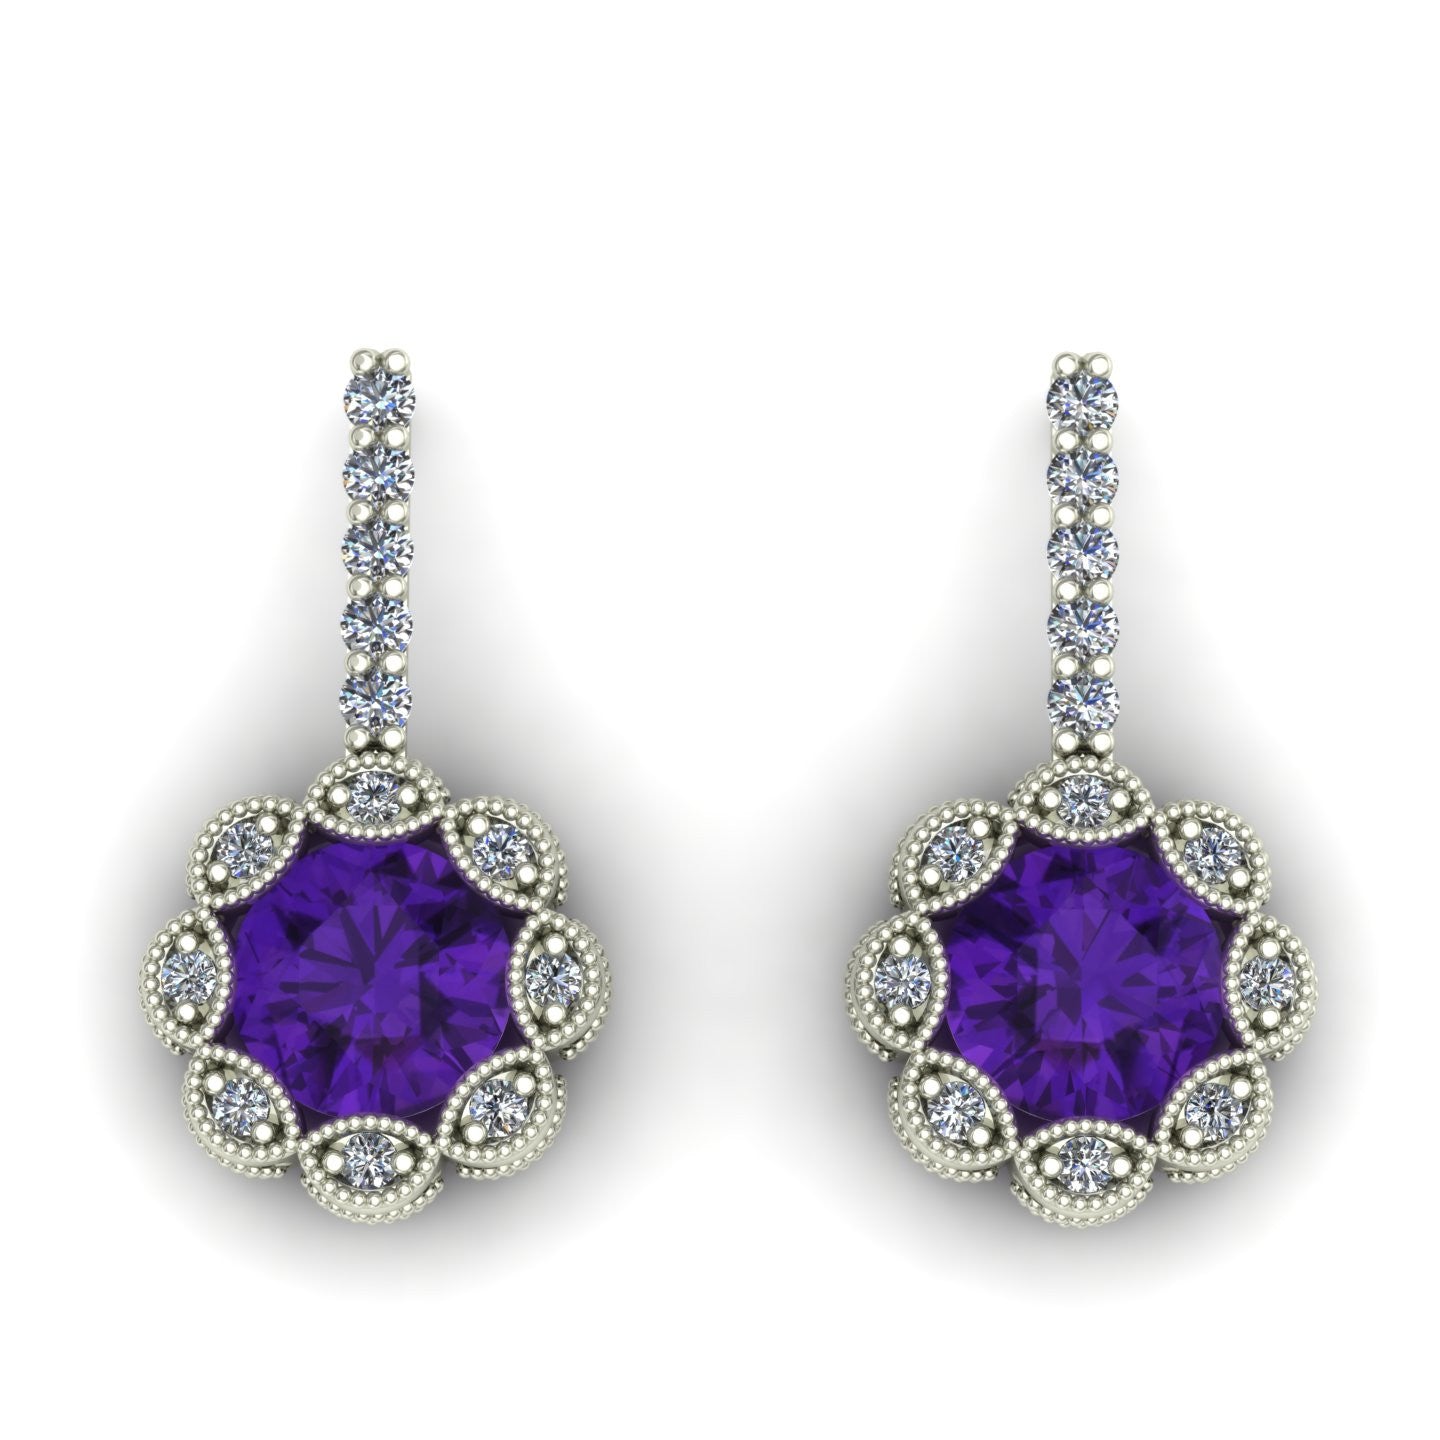 Amethyst and diamond flower earrings in 14k white gold - Charles Babb Designs - top view